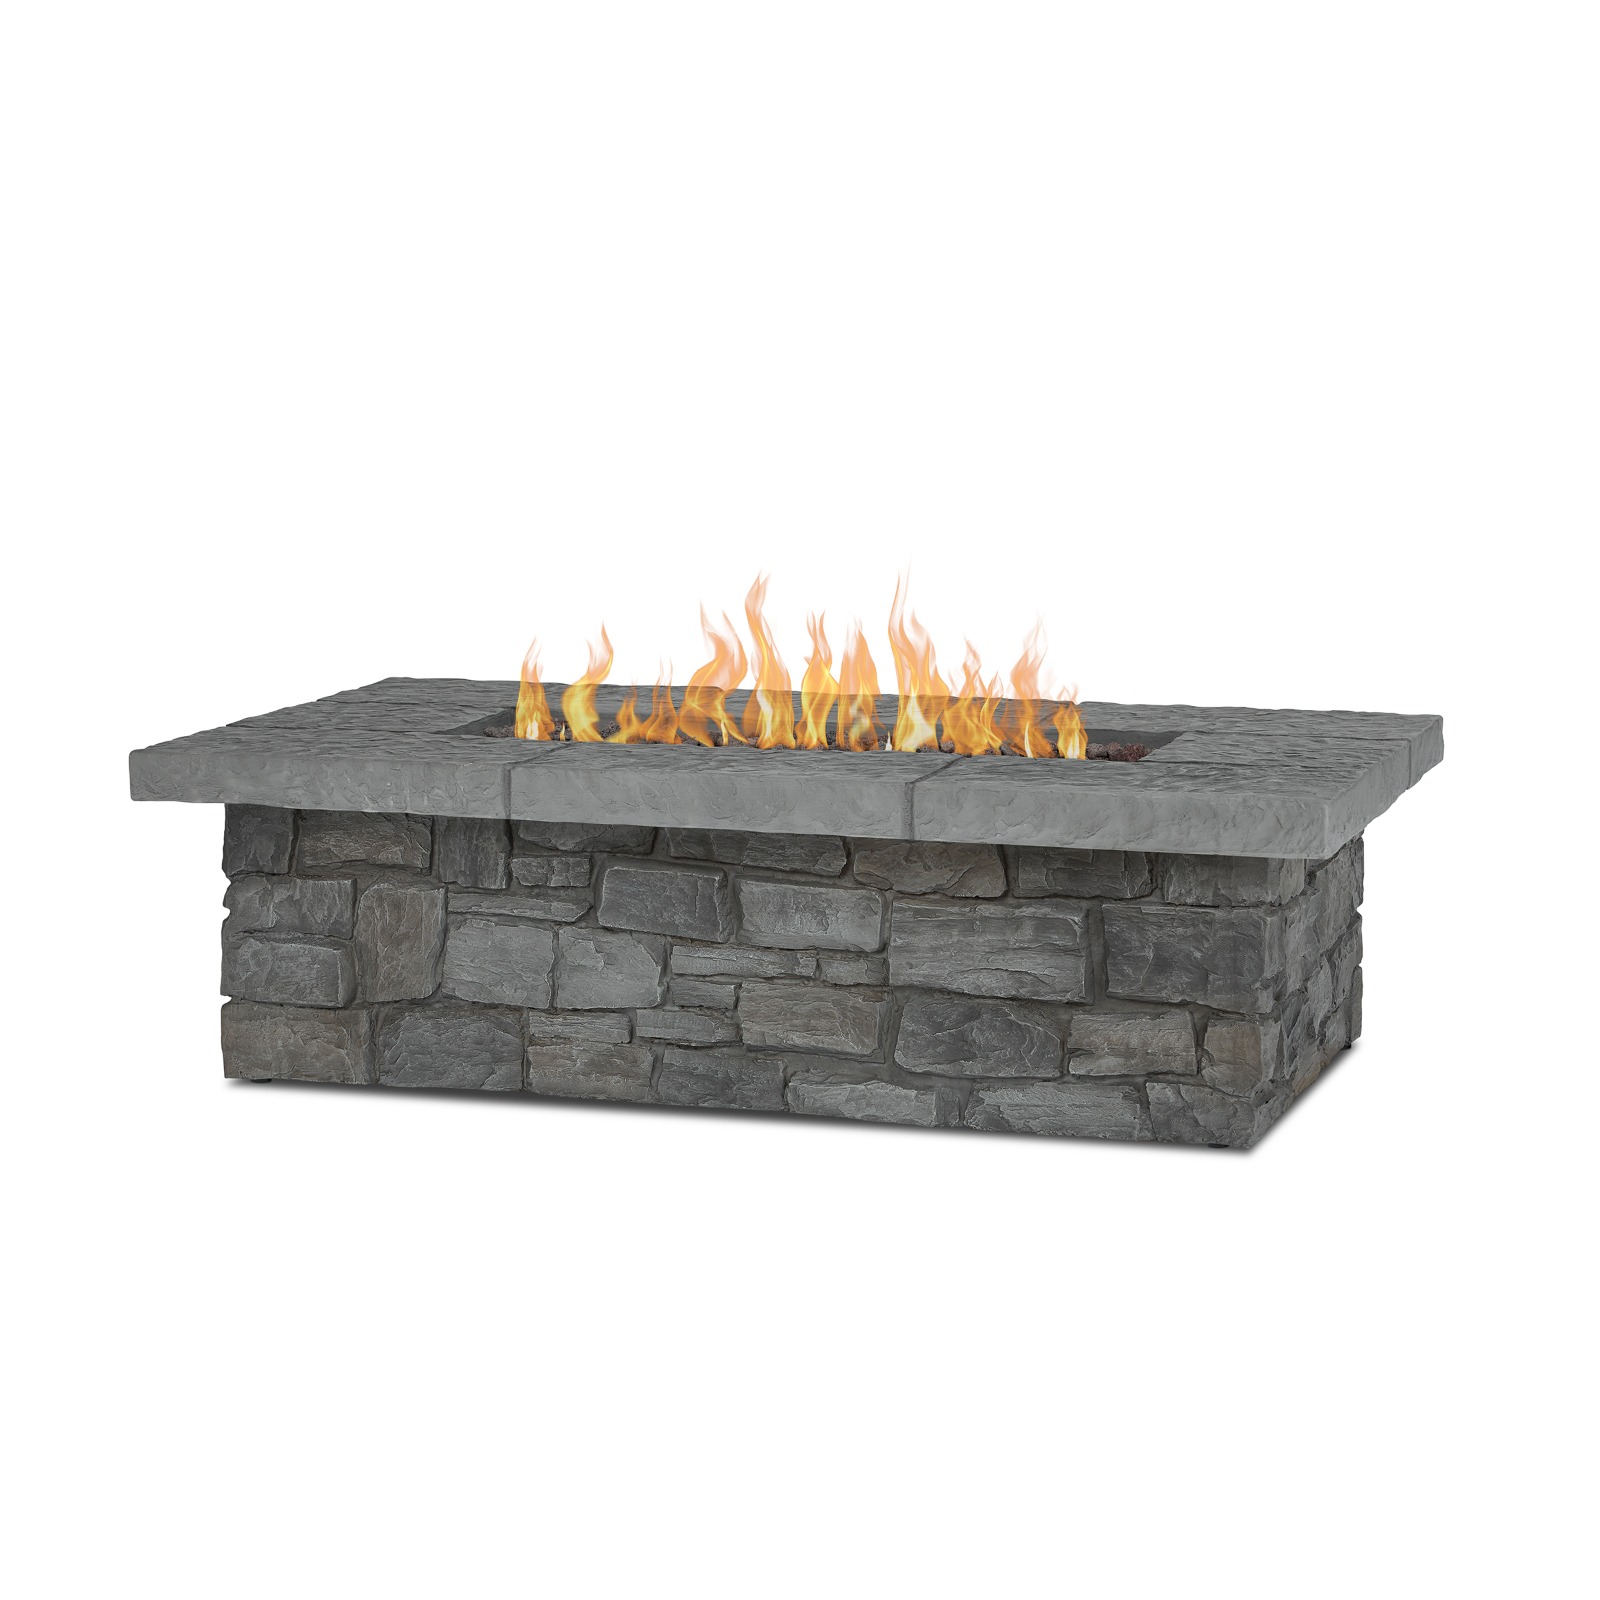 Sedona 52" Rectangle Propane Fire Pit Outdoor Fireplace Fire Table for Backyard or Patio